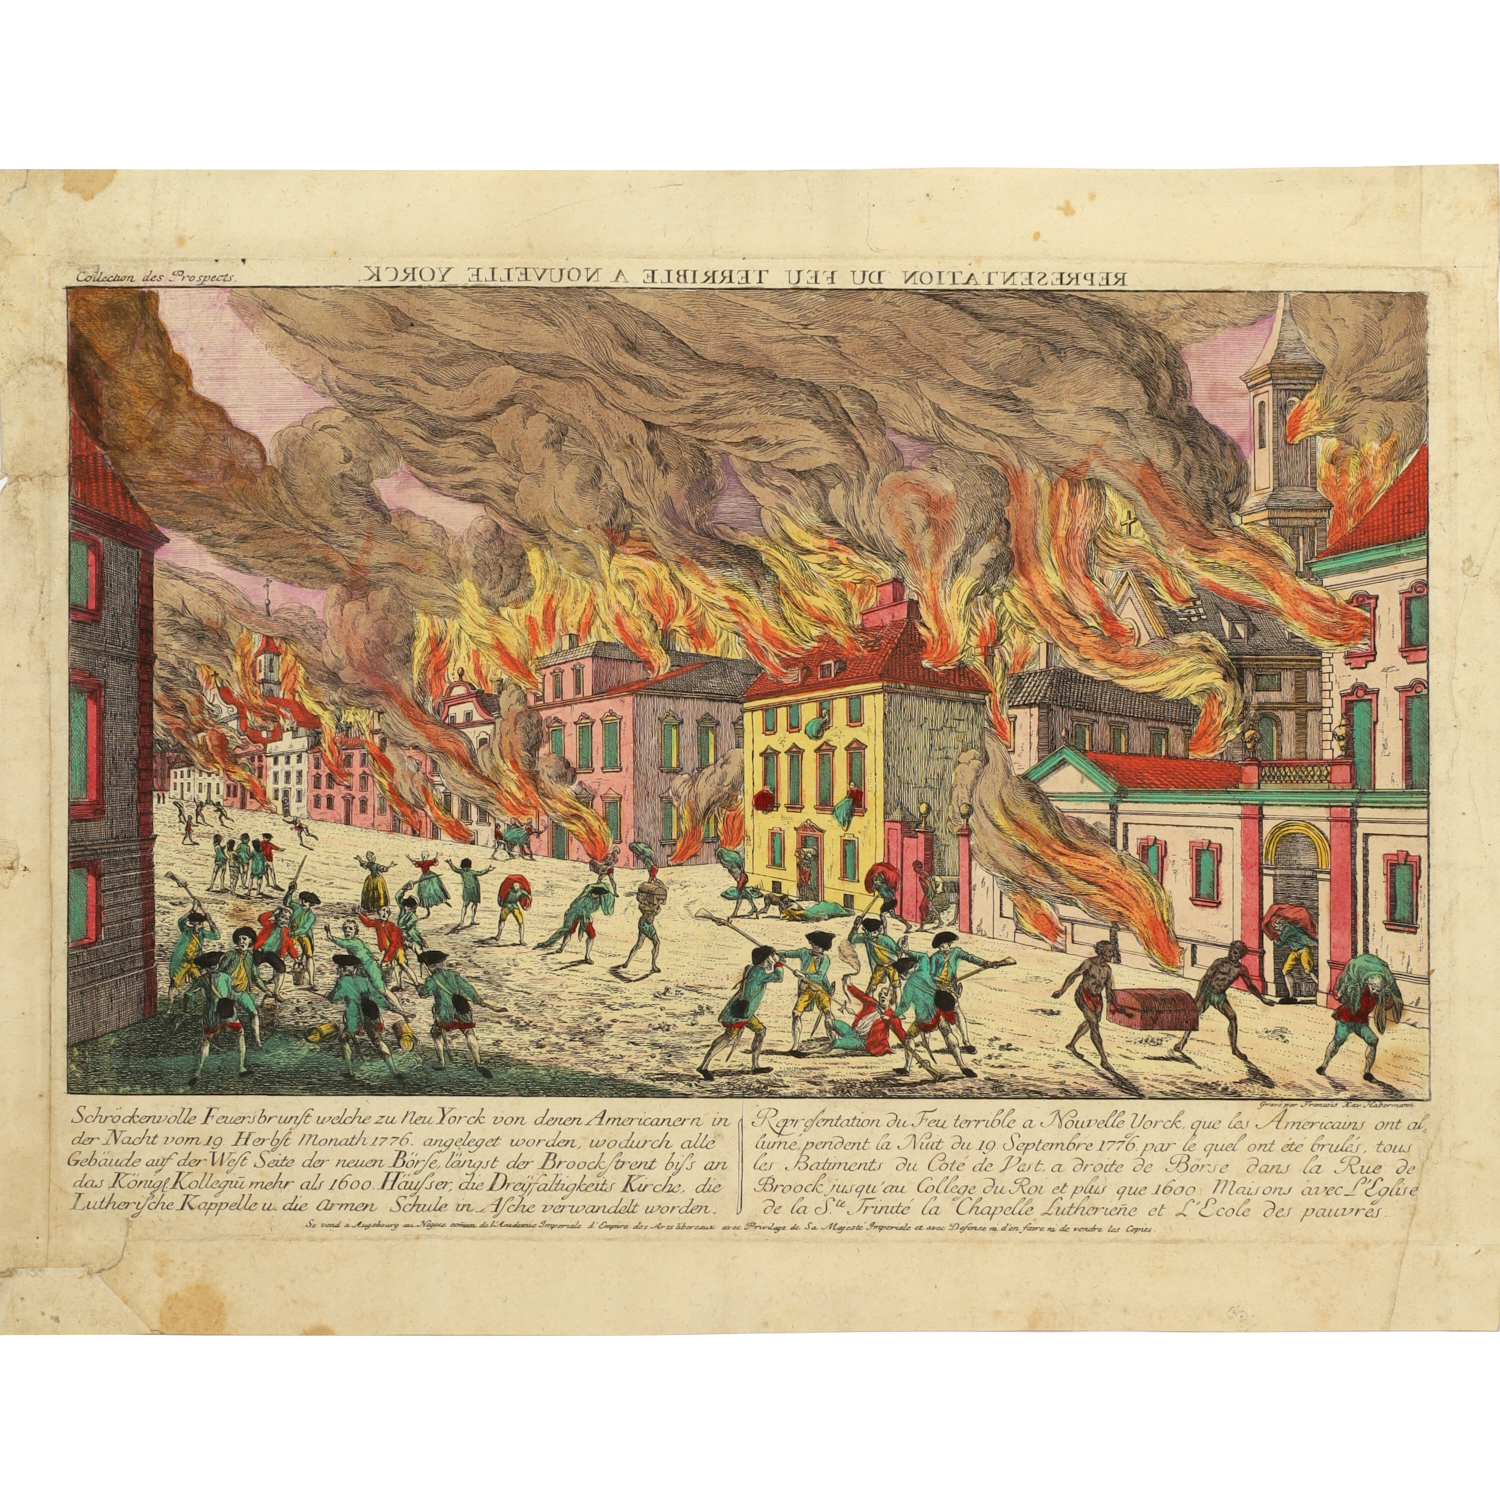 HABERMAN, 1776 GREAT FIRE OF NEW